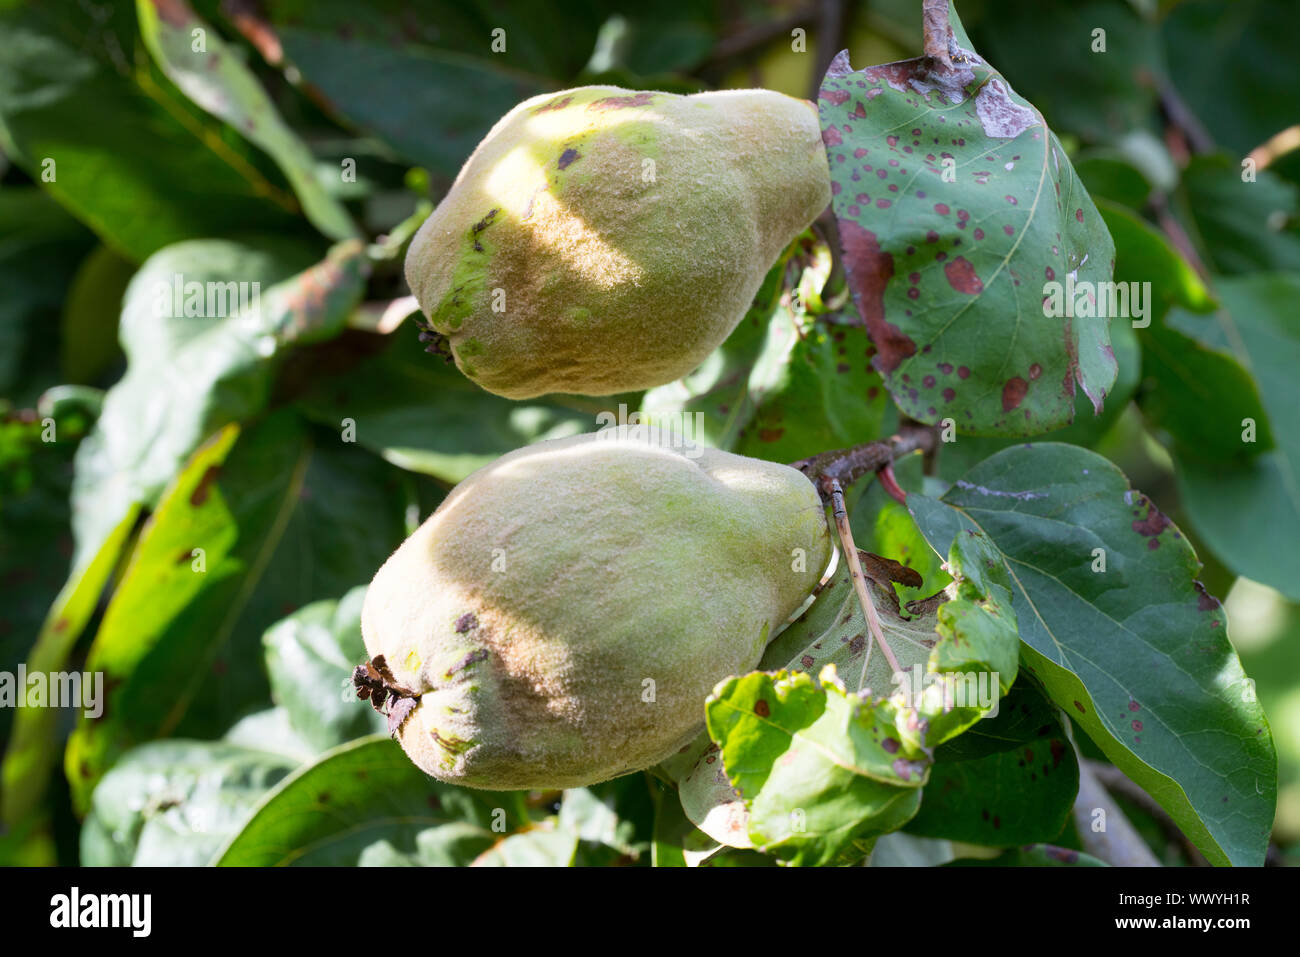 Coings dans un jardin, Constantinople coing, pomme coing Banque D'Images